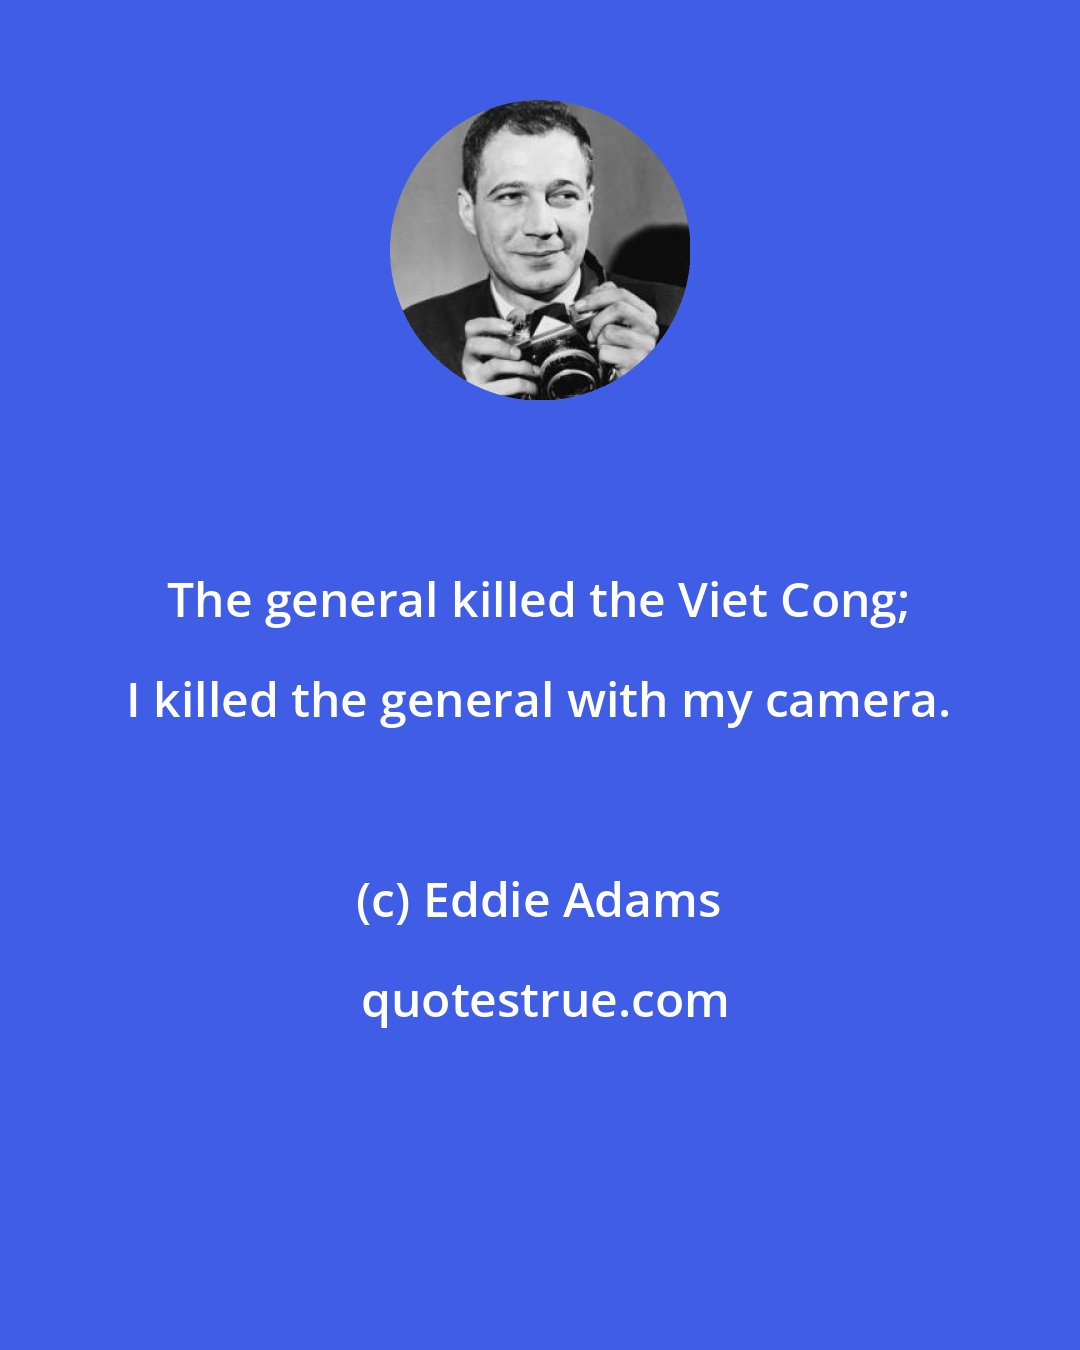 Eddie Adams: The general killed the Viet Cong; I killed the general with my camera.